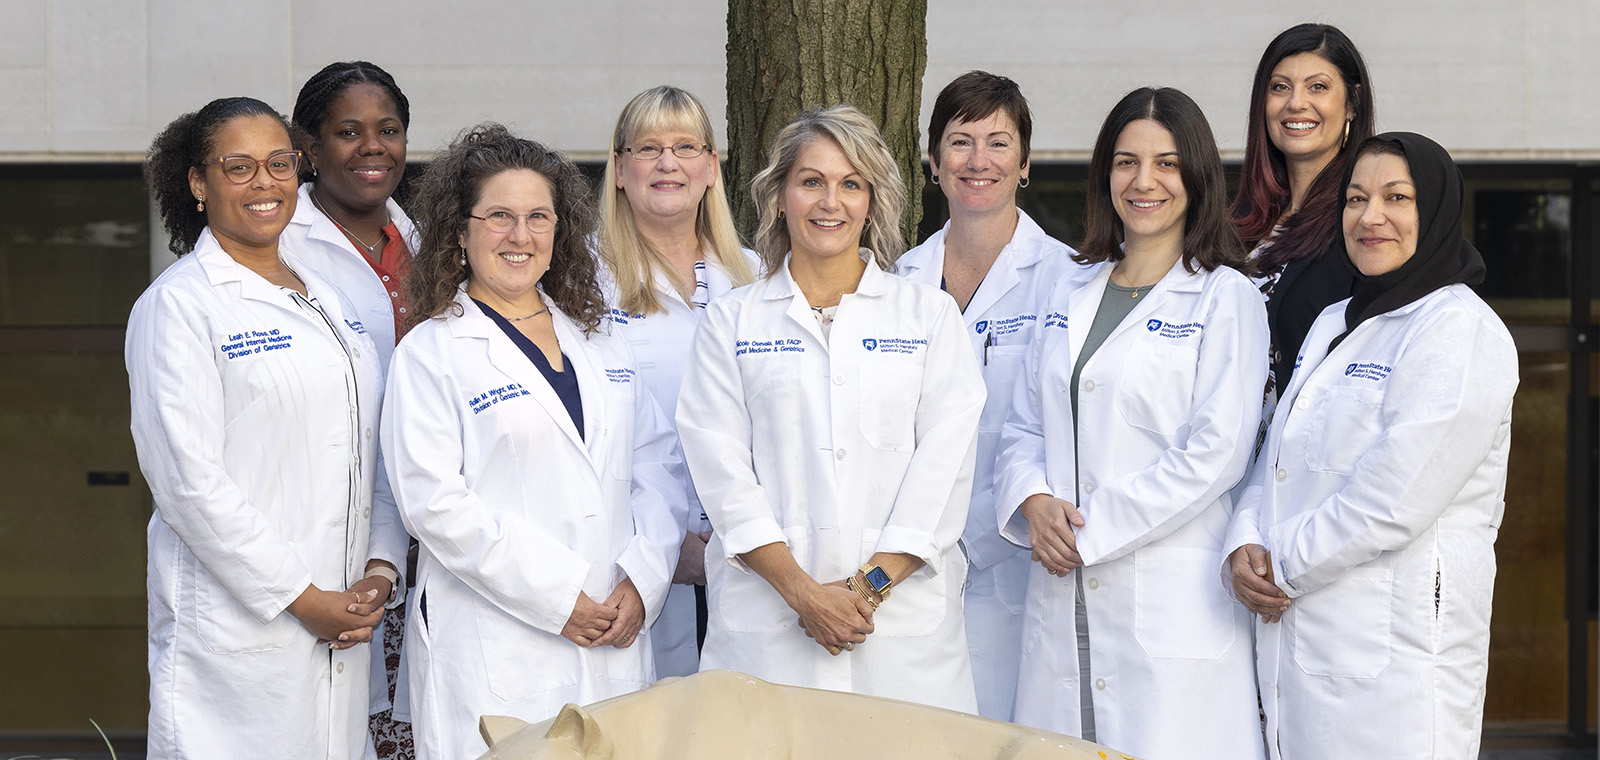 Nine members of the Division of Geriatric Medicine, eight wearing physicians' white coats, stand behind the Nittany Lion statue in the College of Medicine courtyard.